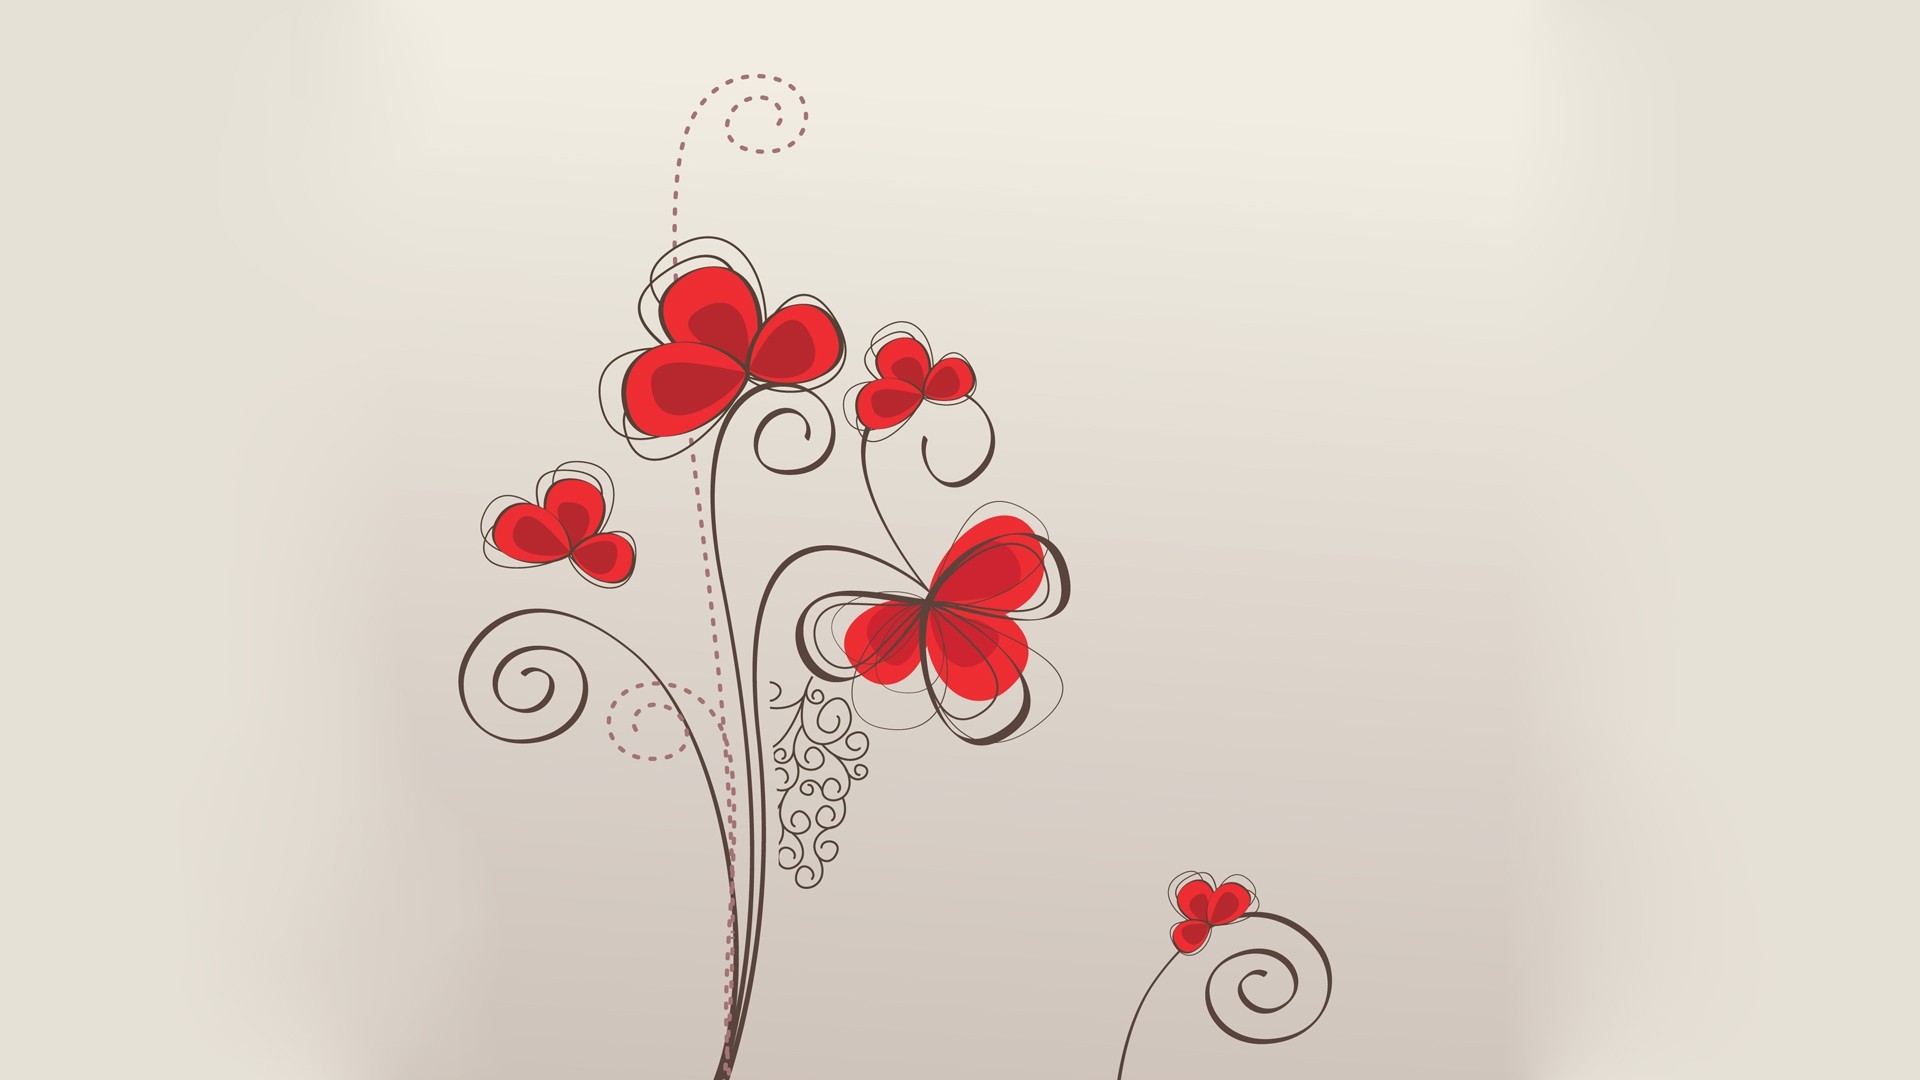 Wallpapers drawing illustration heart on the desktop